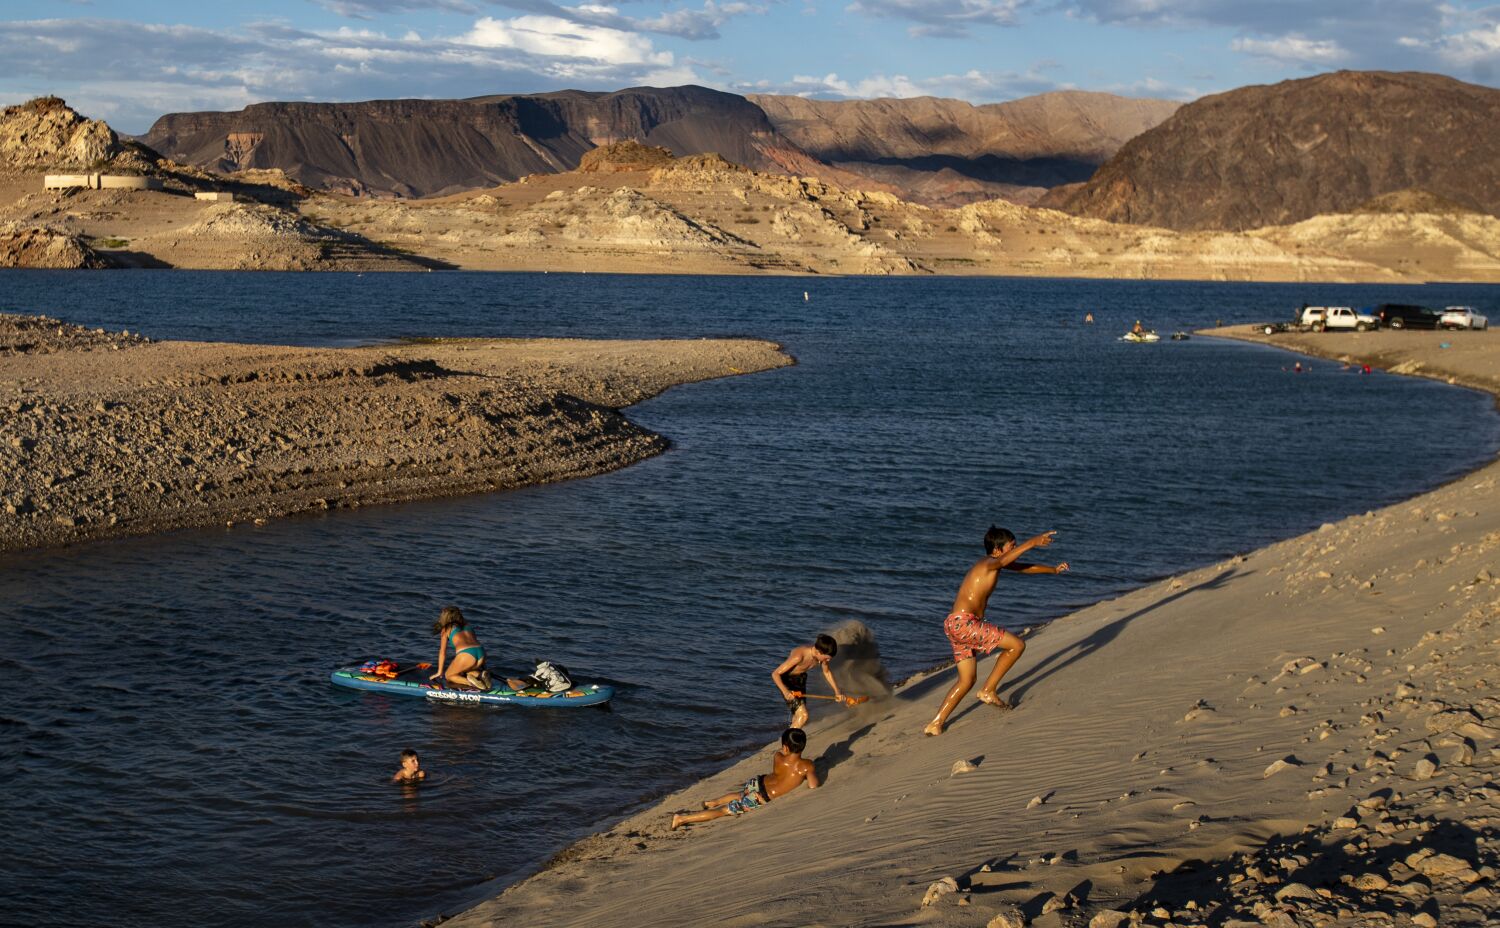 Colorado River losing vast amounts of water due to warming climate, study finds